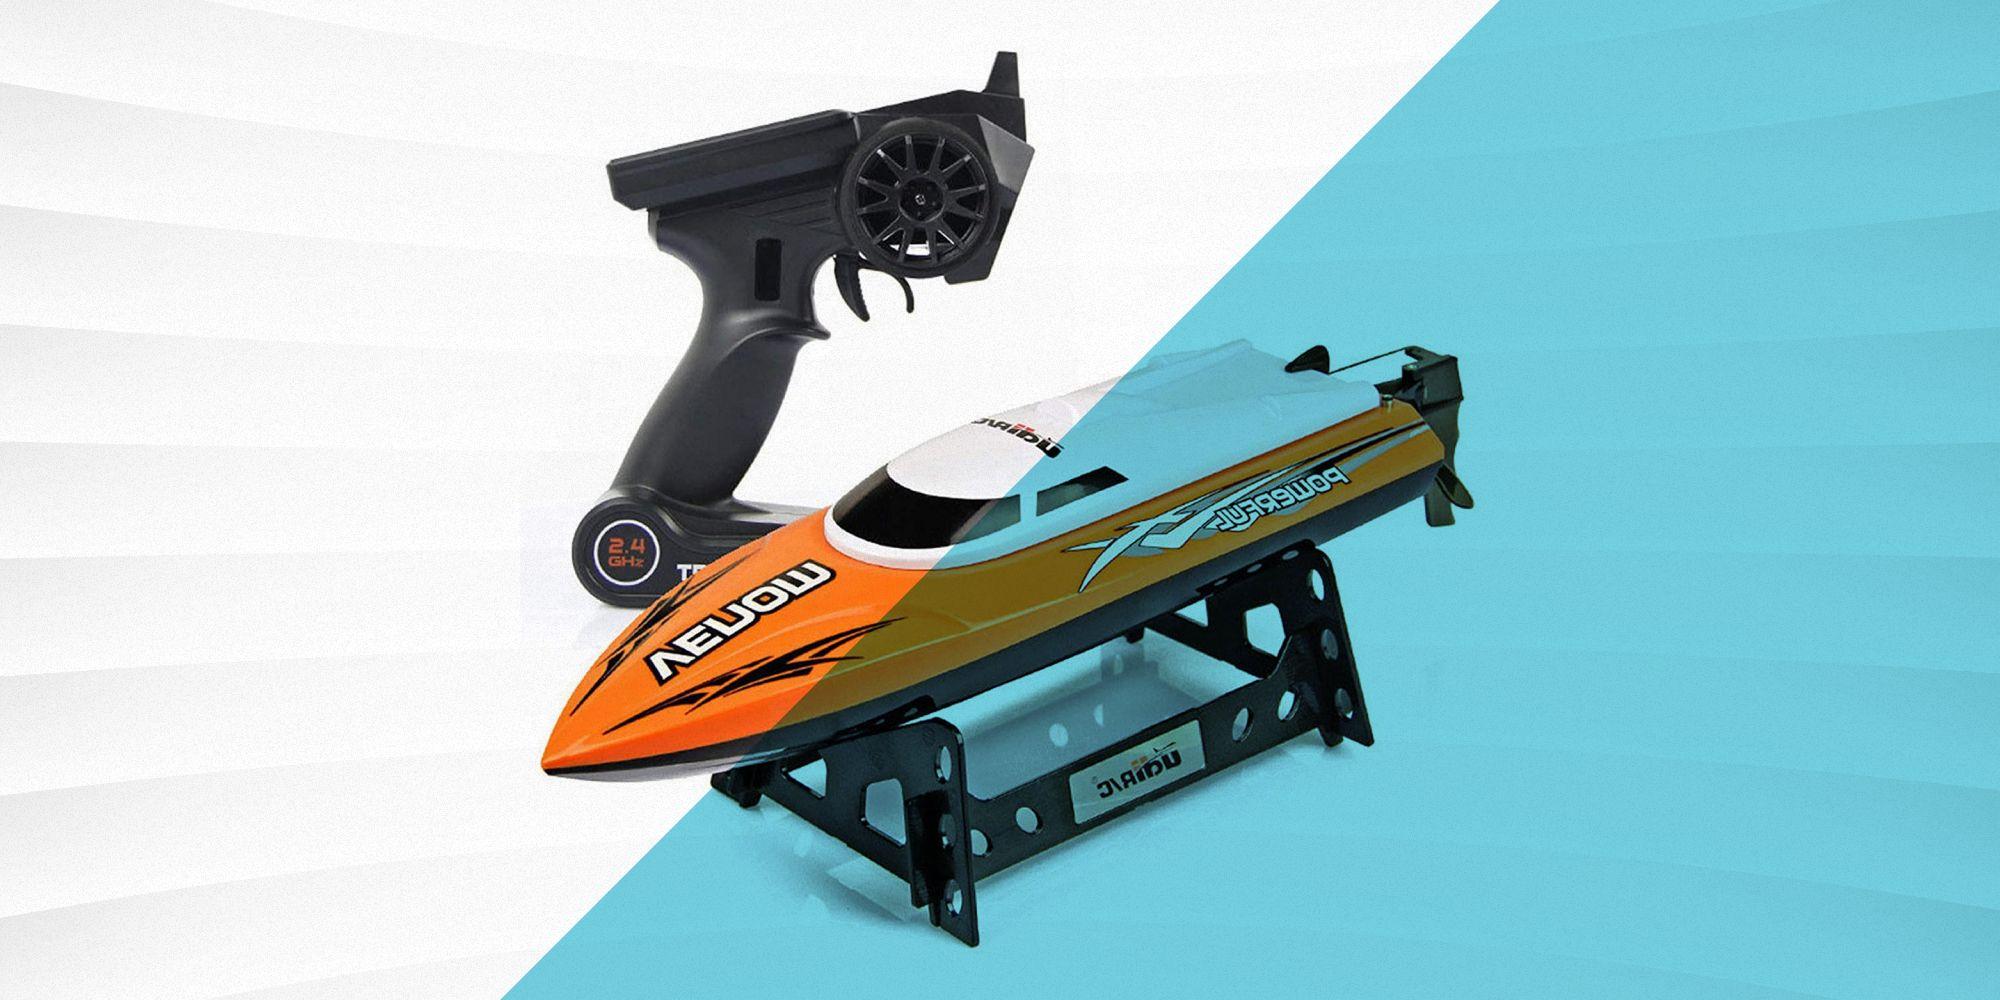 Remote Control Boat With Camera: Find Your Perfect Remote Control Boat with Camera from Trusted Websites